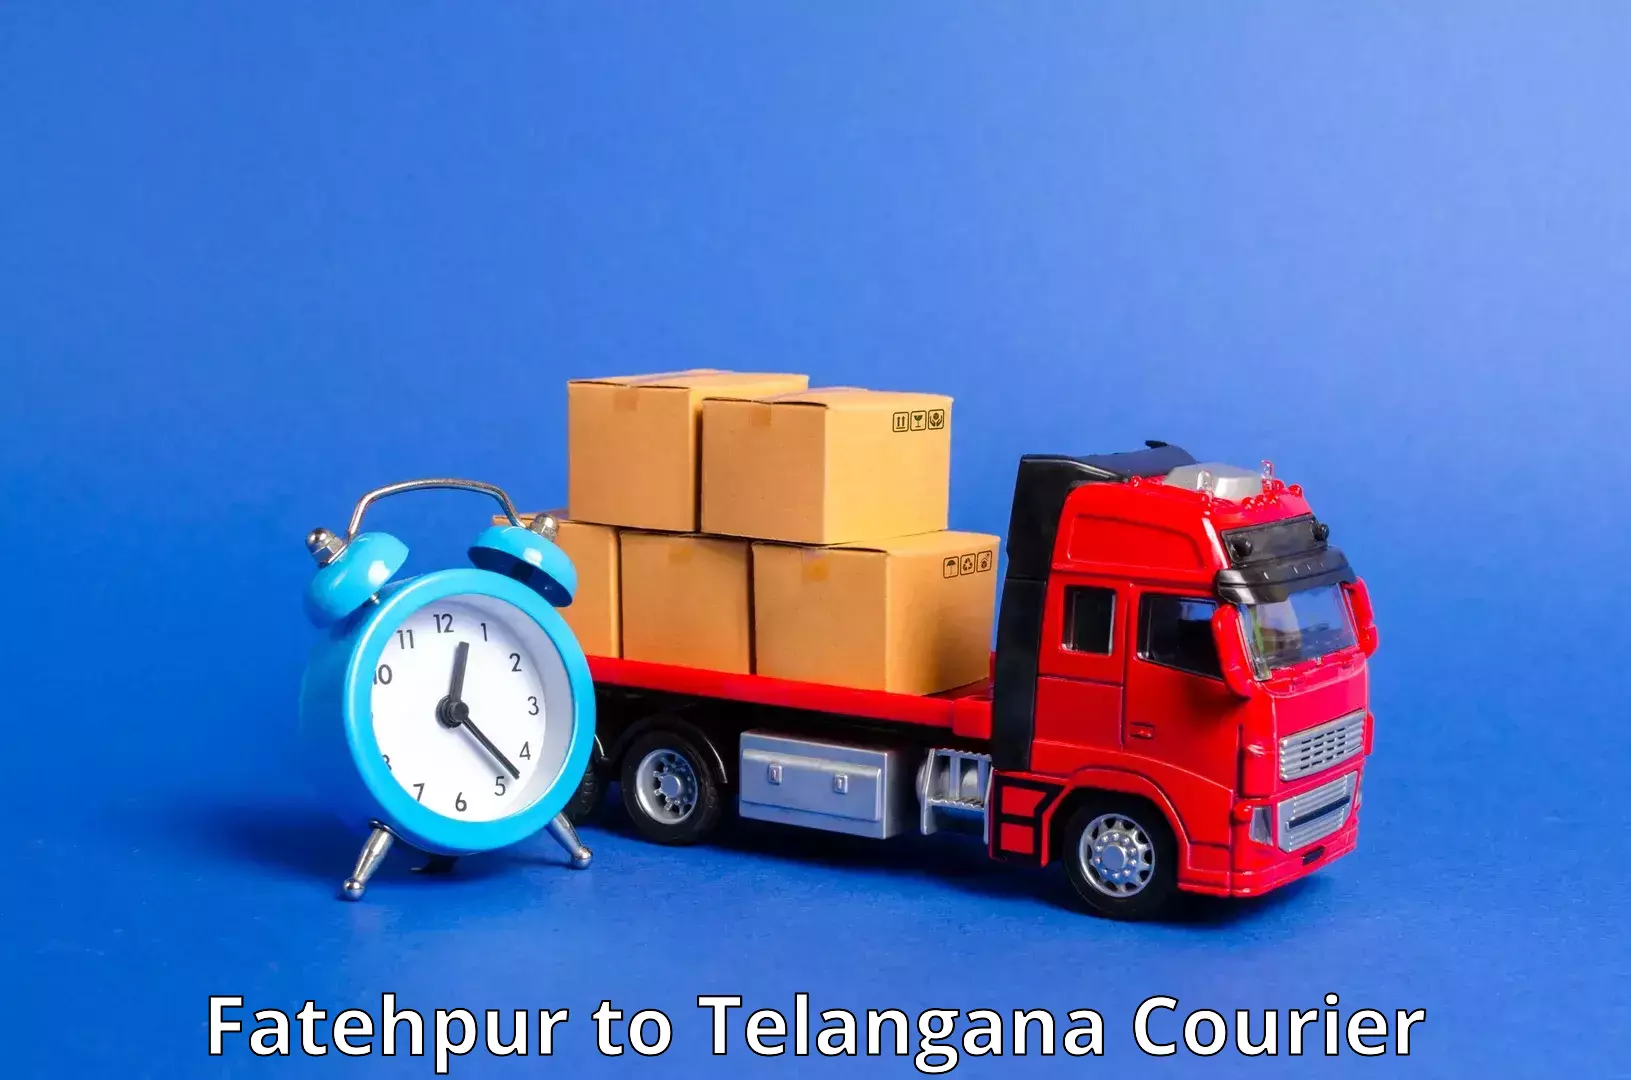 Large package courier Fatehpur to Sangareddy